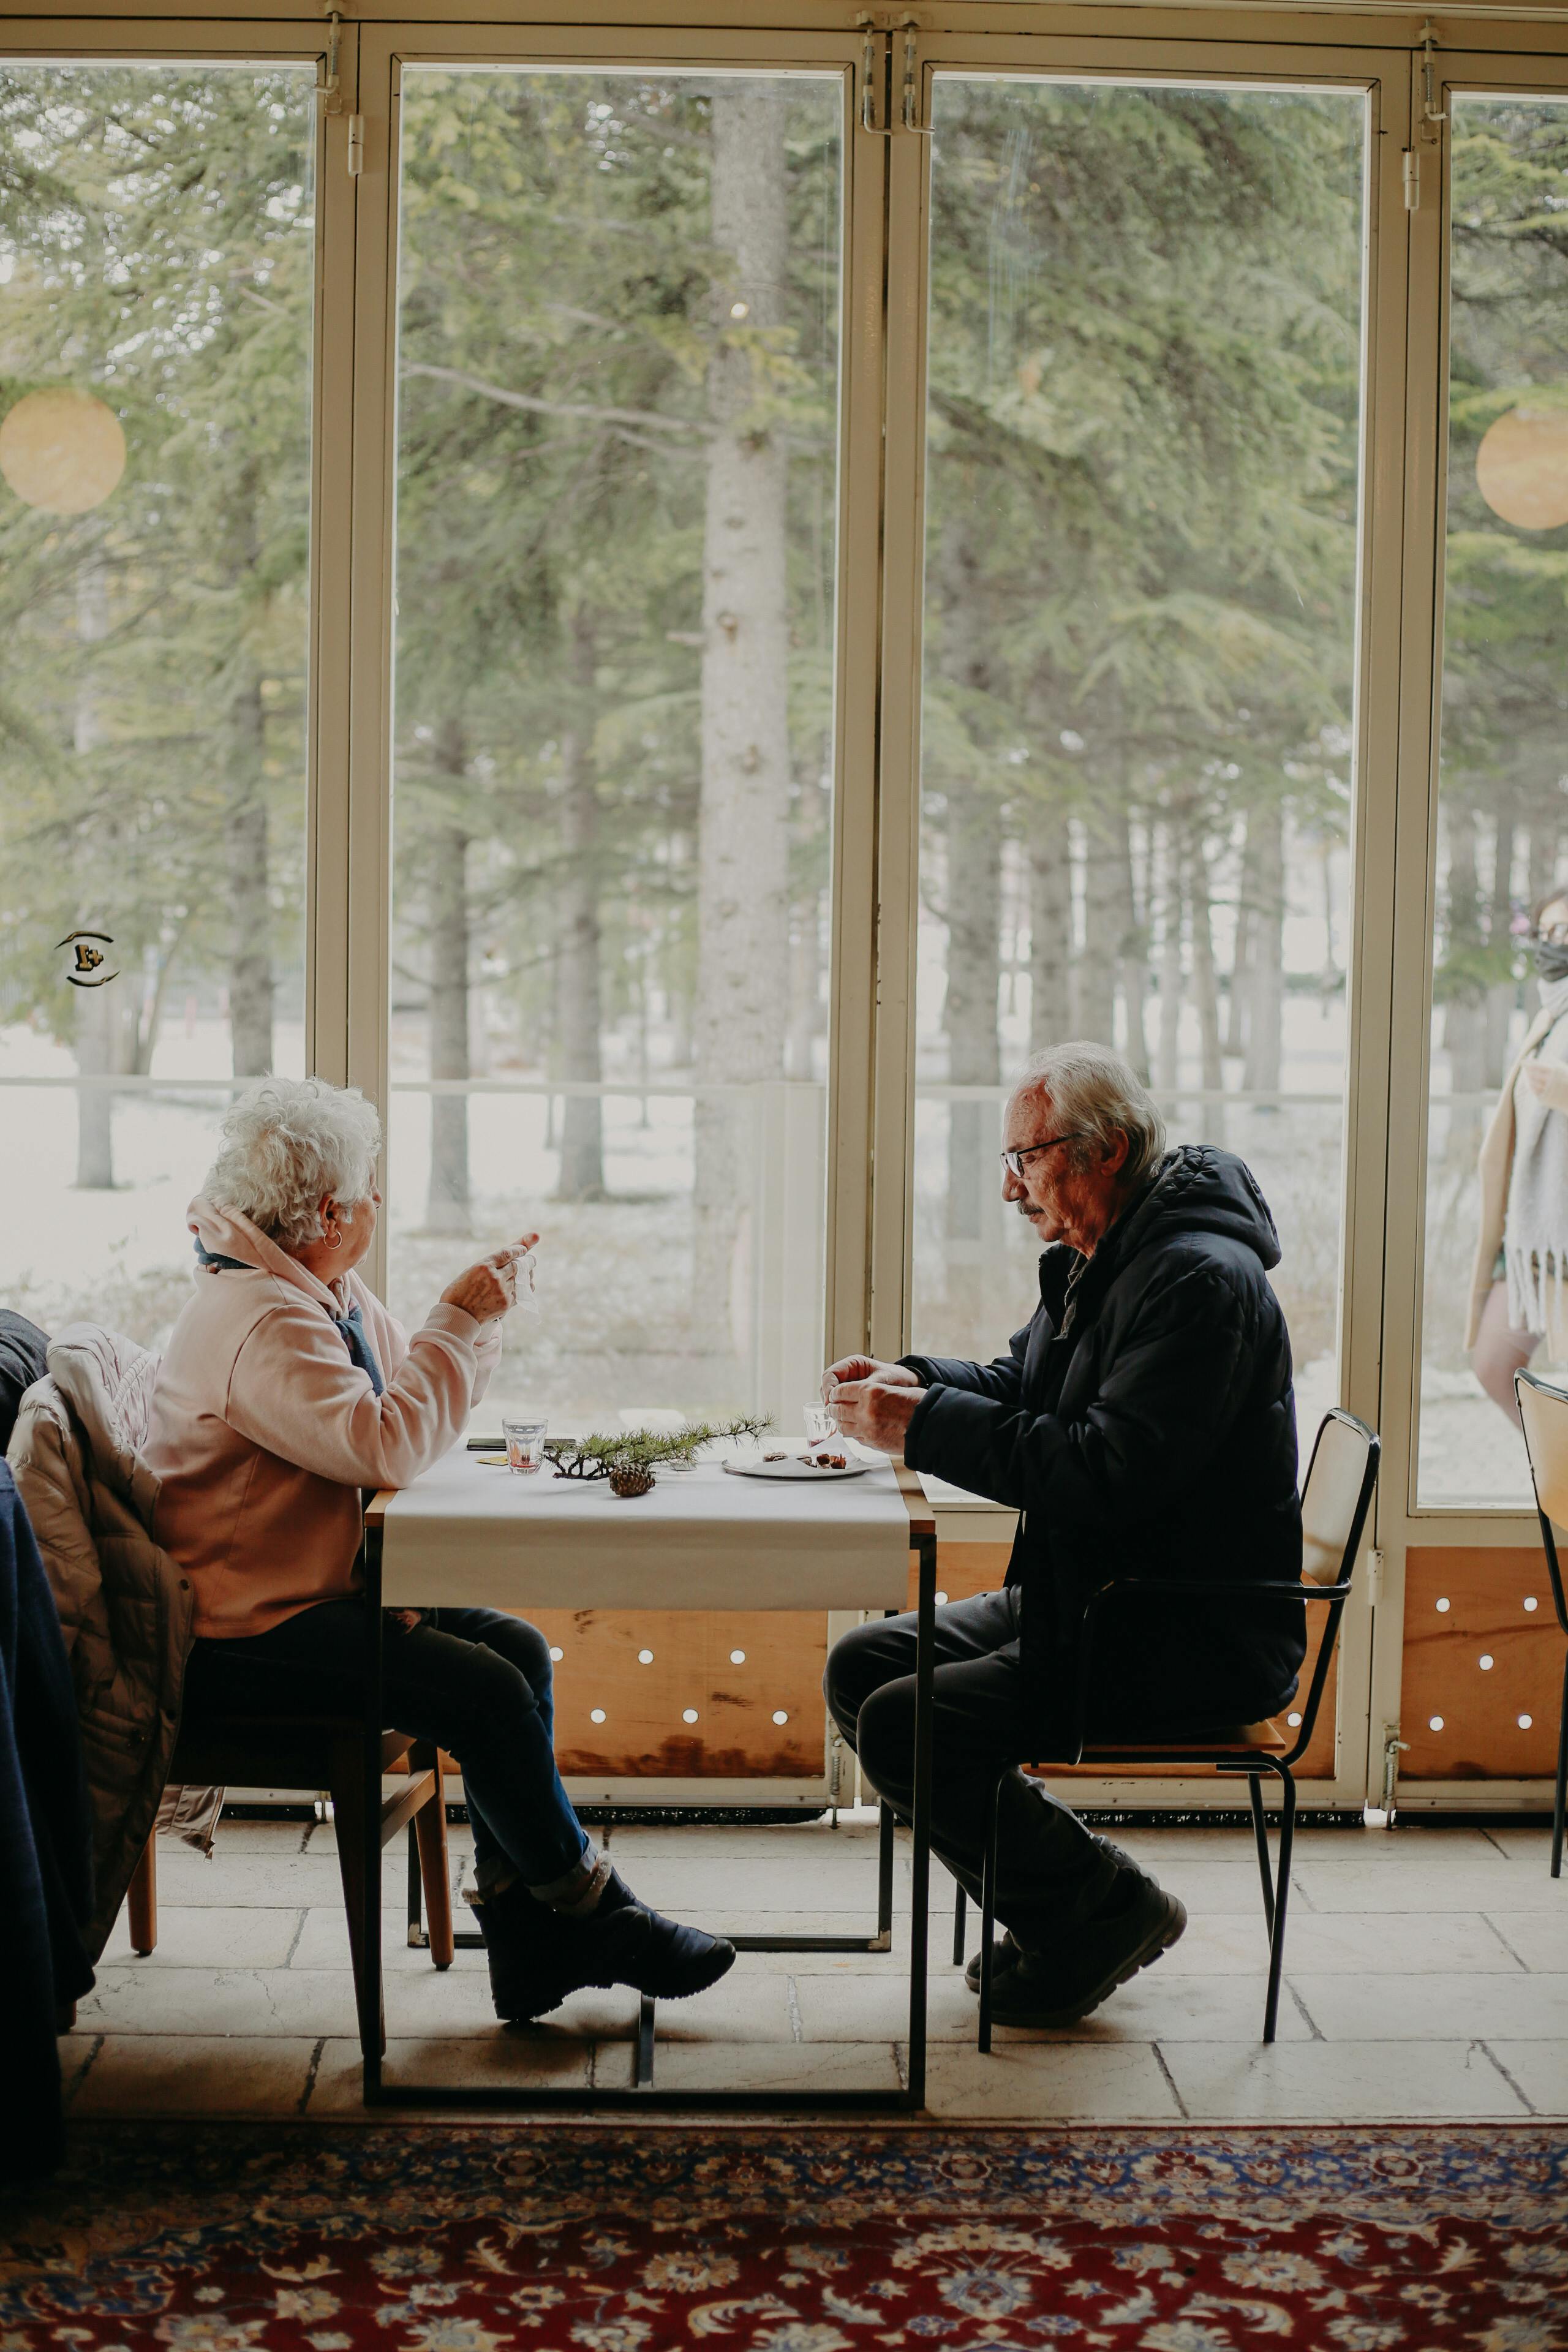 Senior couple eating in a restaurant | Source: Pexels